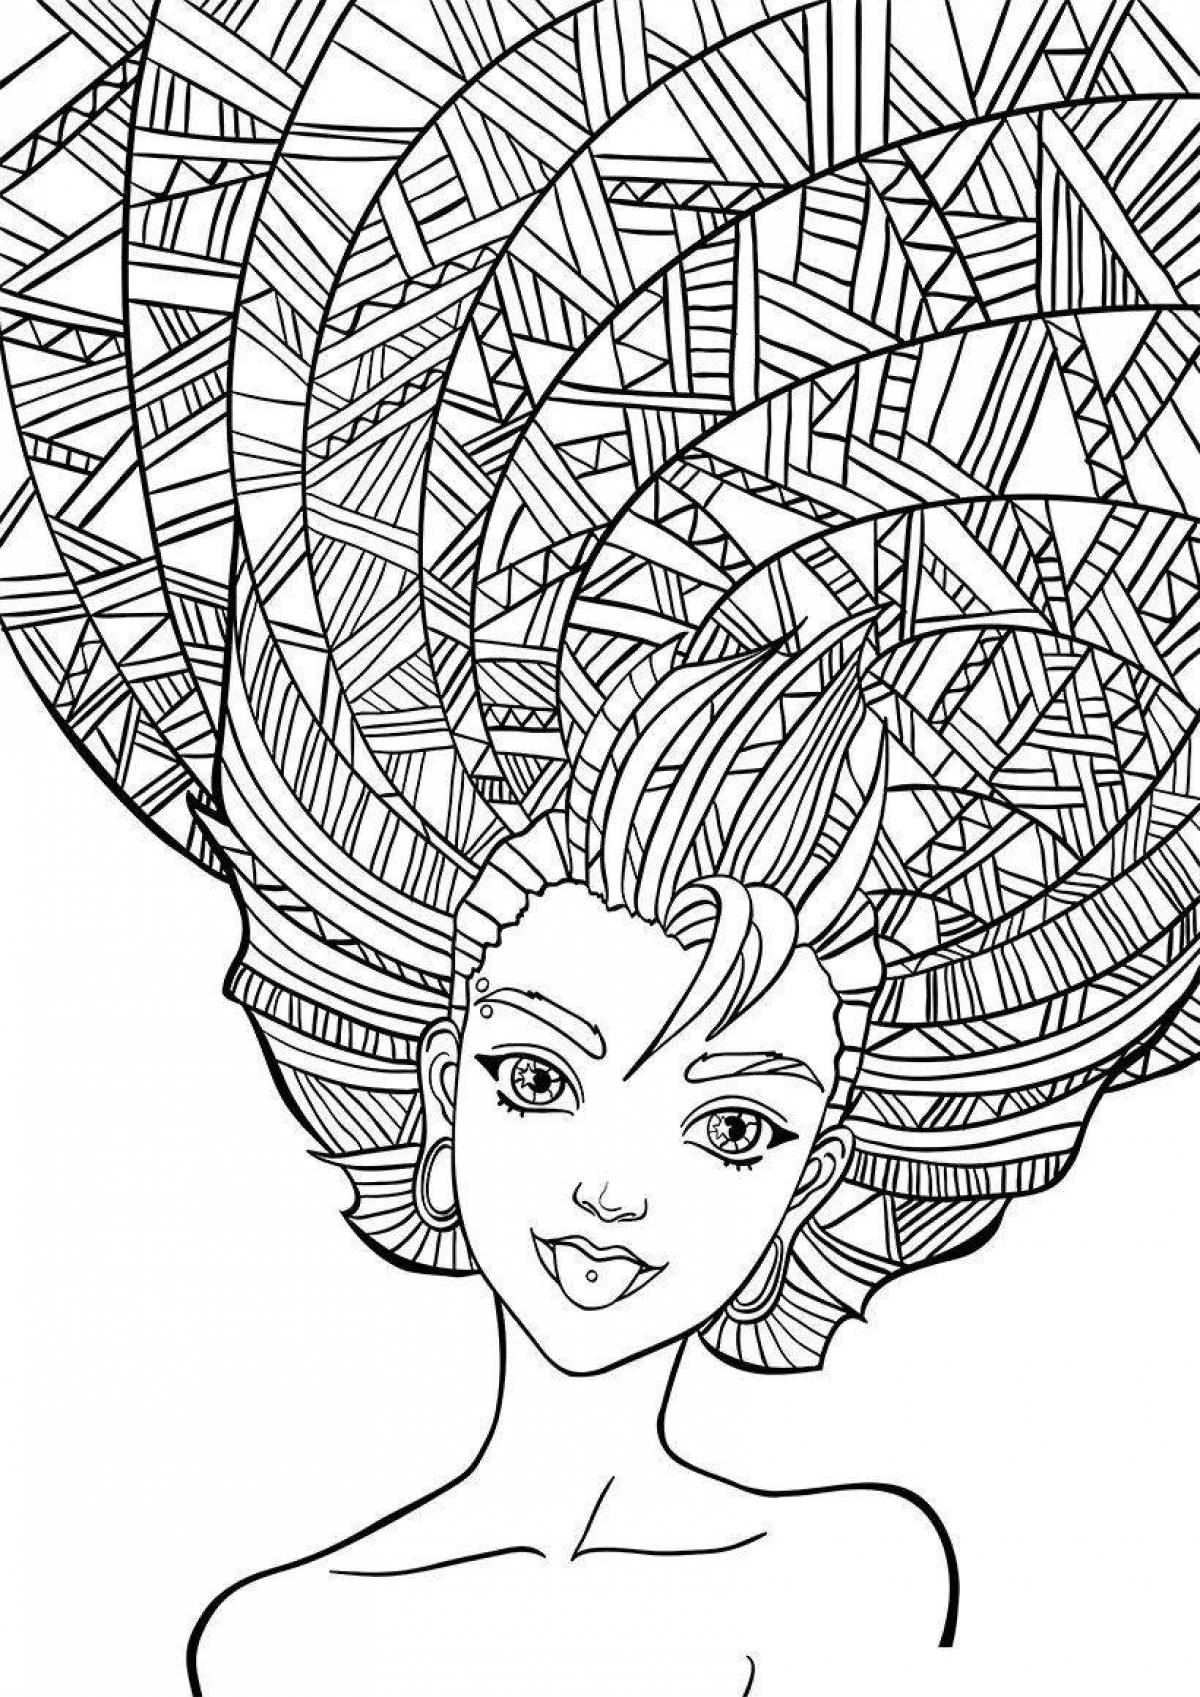 Radiant coloring page is the best in the world